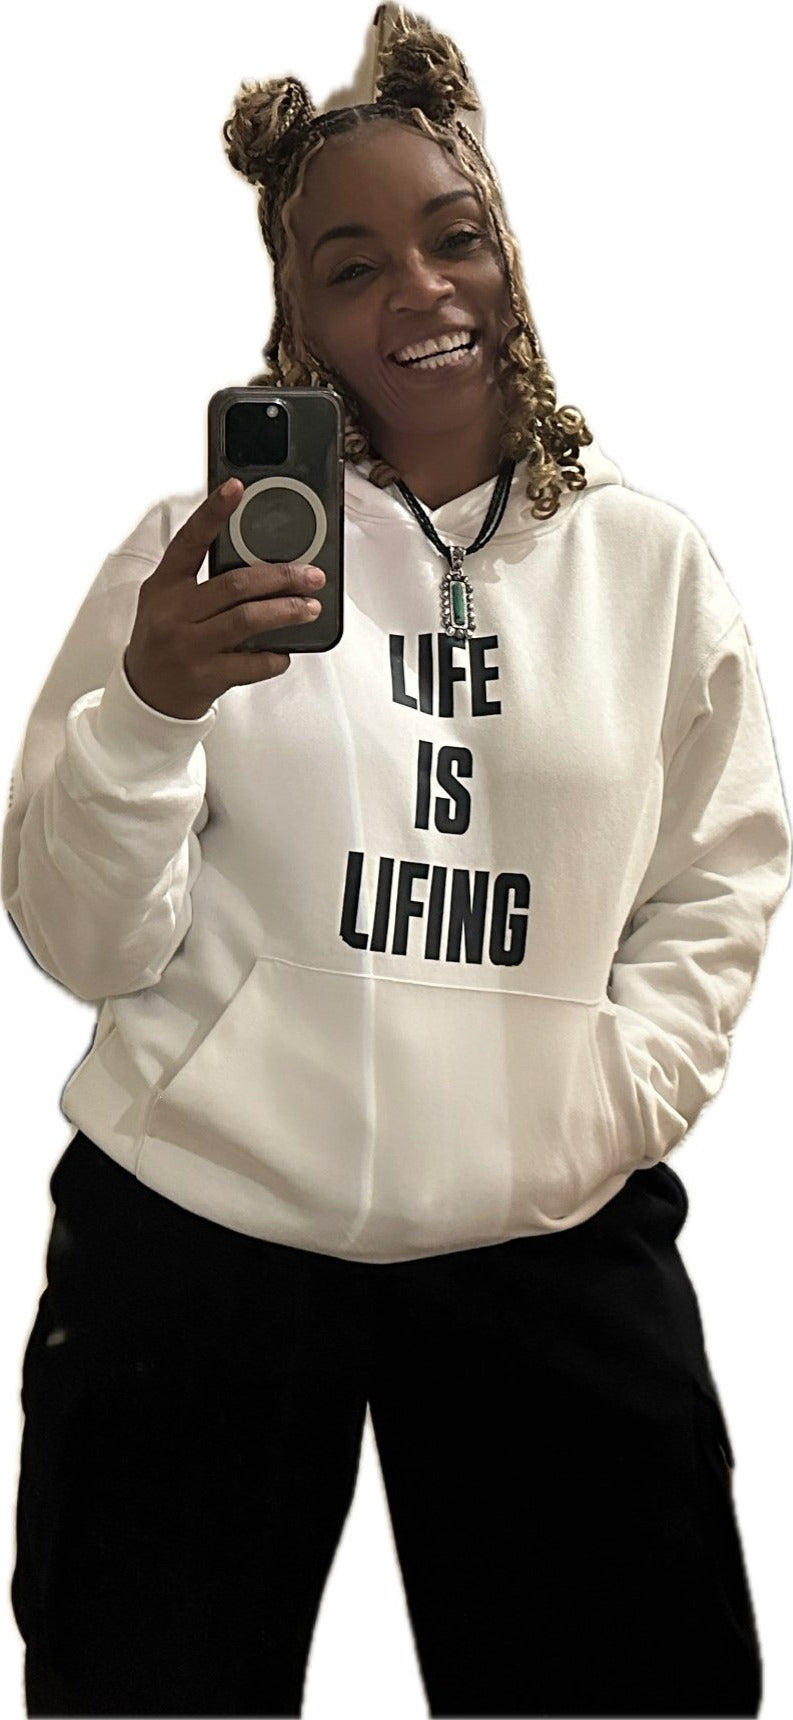 Life is Lifing Hoodie - House of FaSHUN by Shun Melson